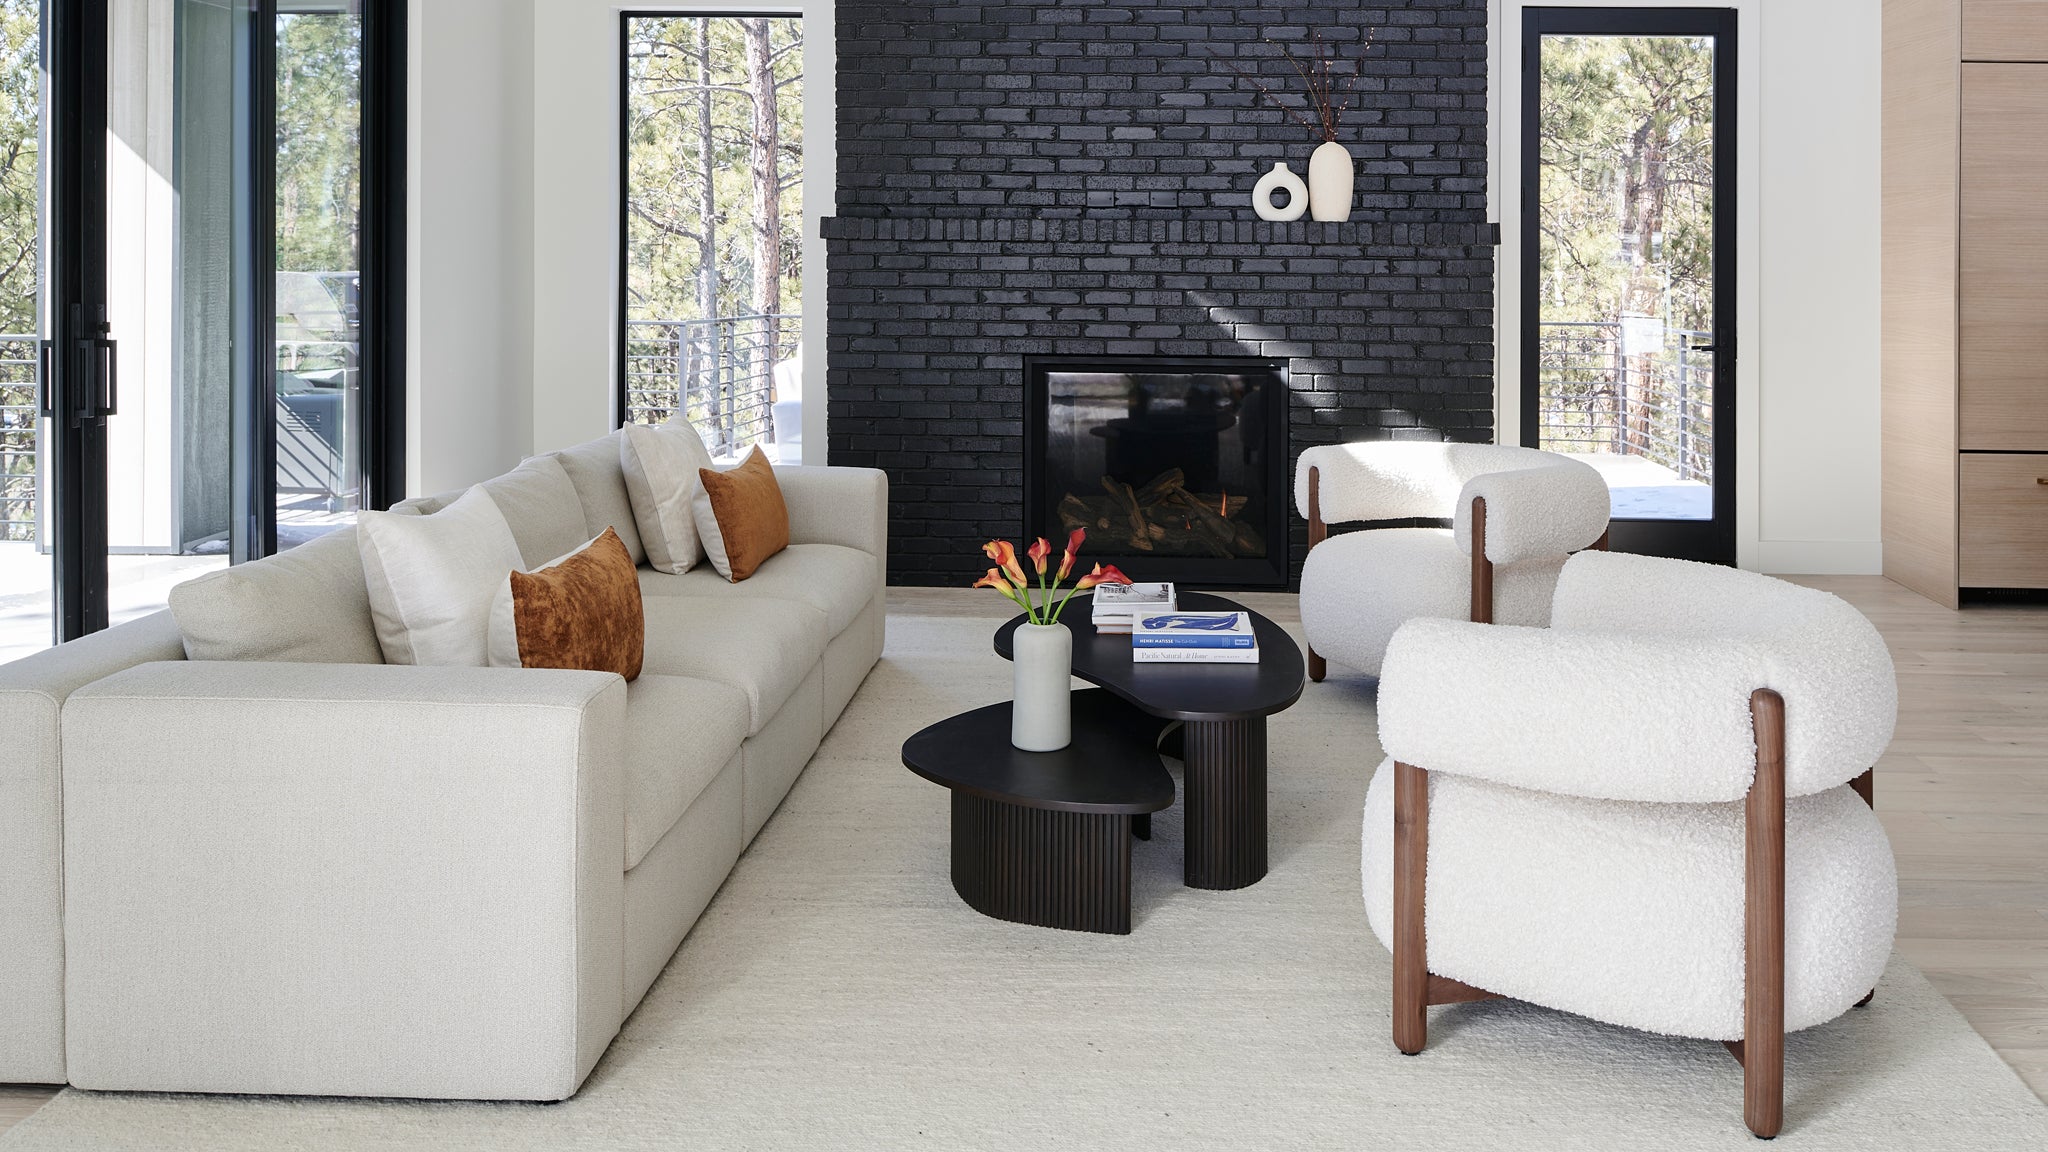 A stylish living room with a textured black fireplace, modern furniture, and forest views through large windows.